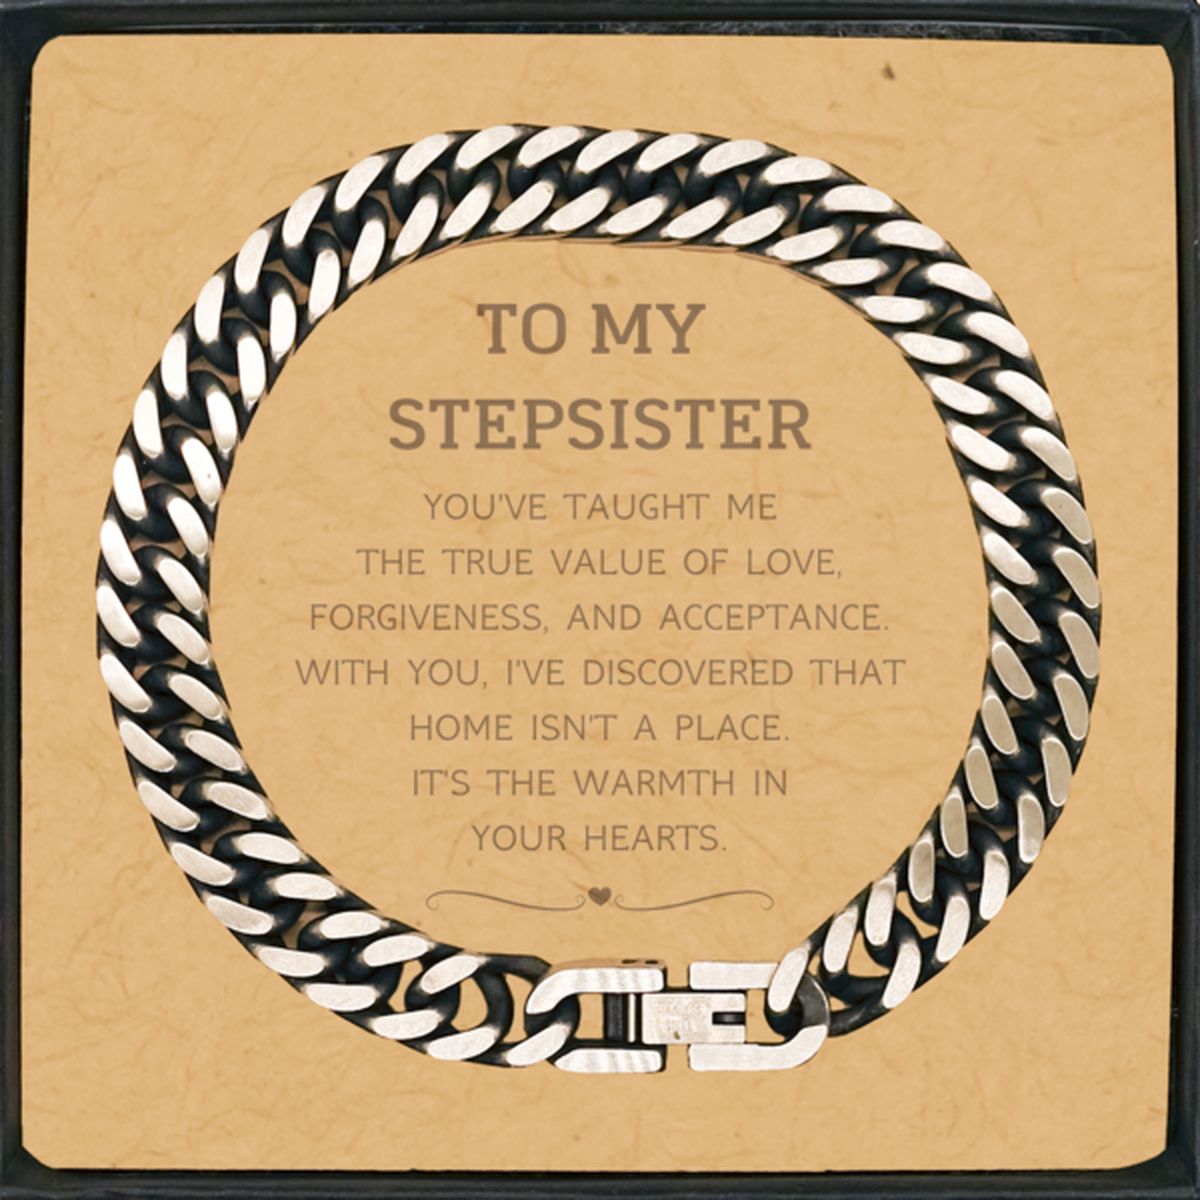 To My Stepsister Gifts, You've taught me the true value of love, Thank You Gifts For Stepsister, Birthday Cuban Link Chain Bracelet For Stepsister